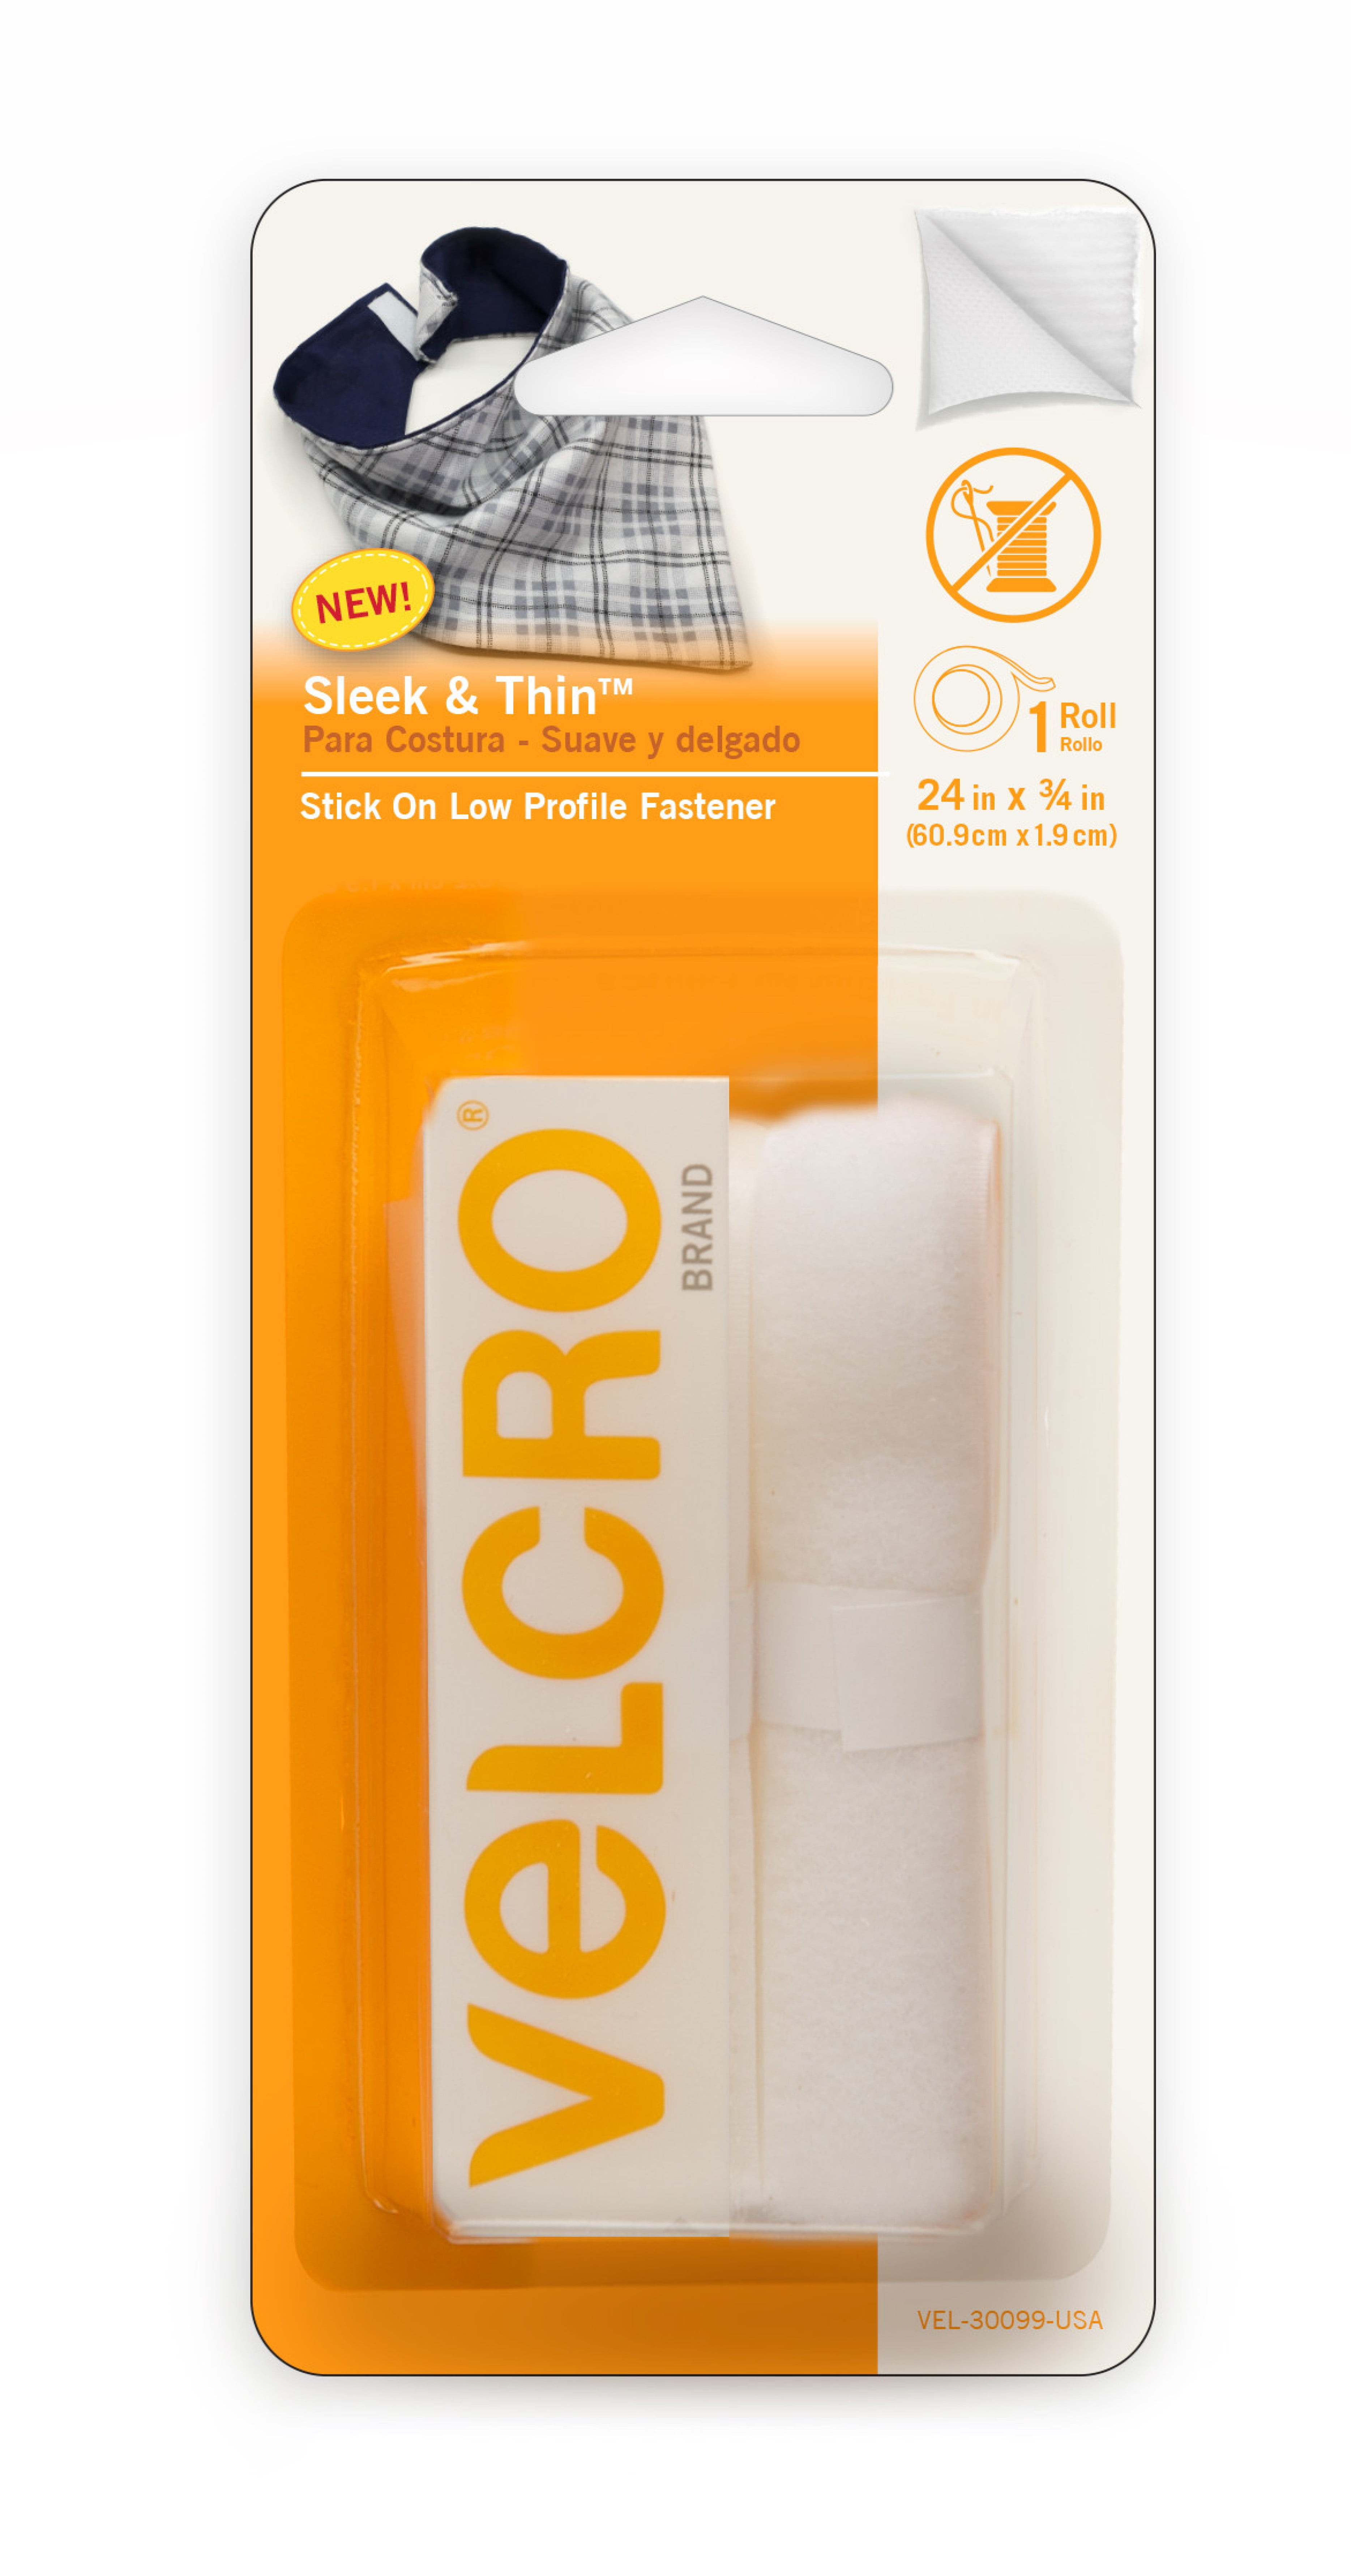 VELCRO Brand Sleek and Thin Stick On Tape for Fabrics | 24in x 3/4in, White| Soft on Skin Ultra Light Adhesive Back No Sewing (VEL-30099-USA) - Walmart.com